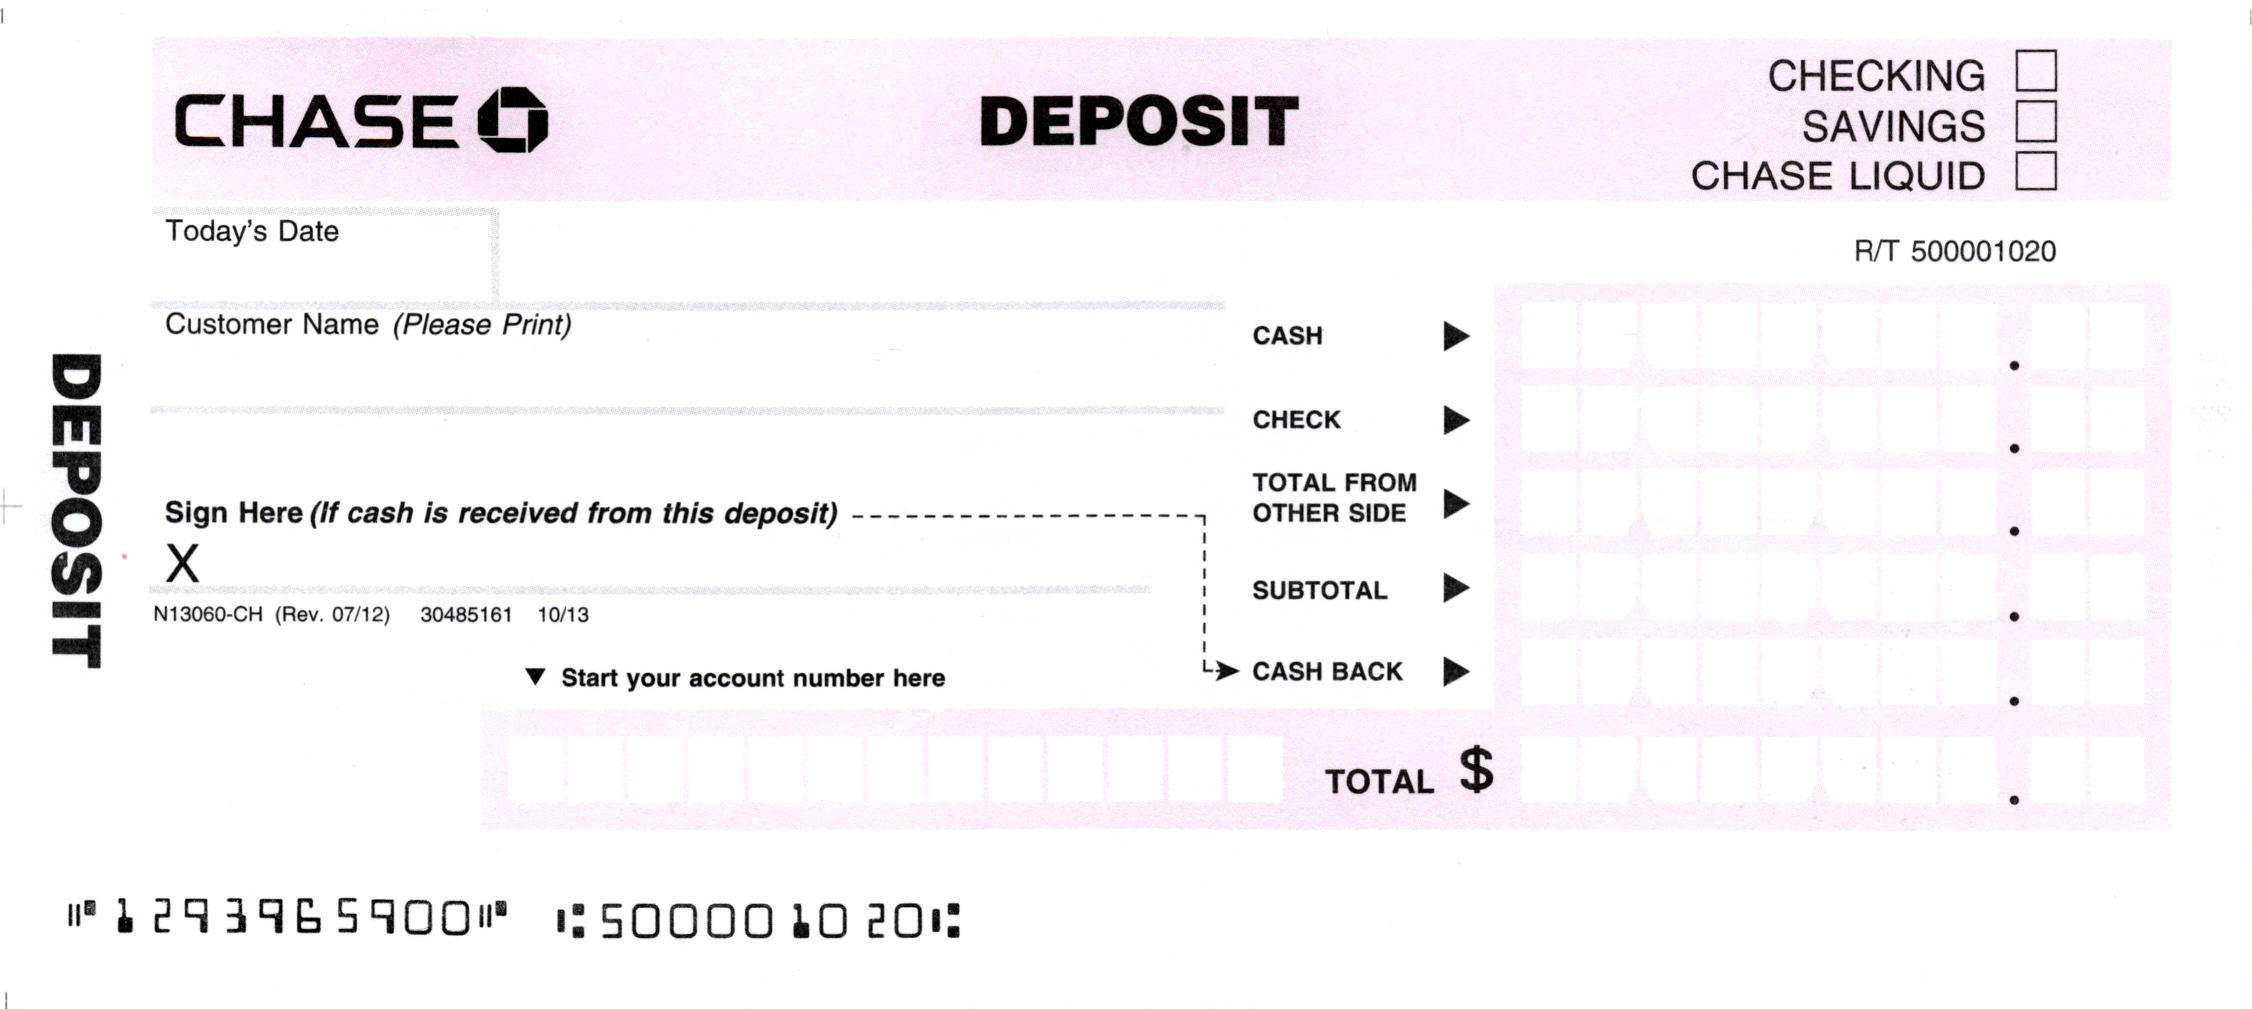 deposit slip template word   Into.anysearch.co